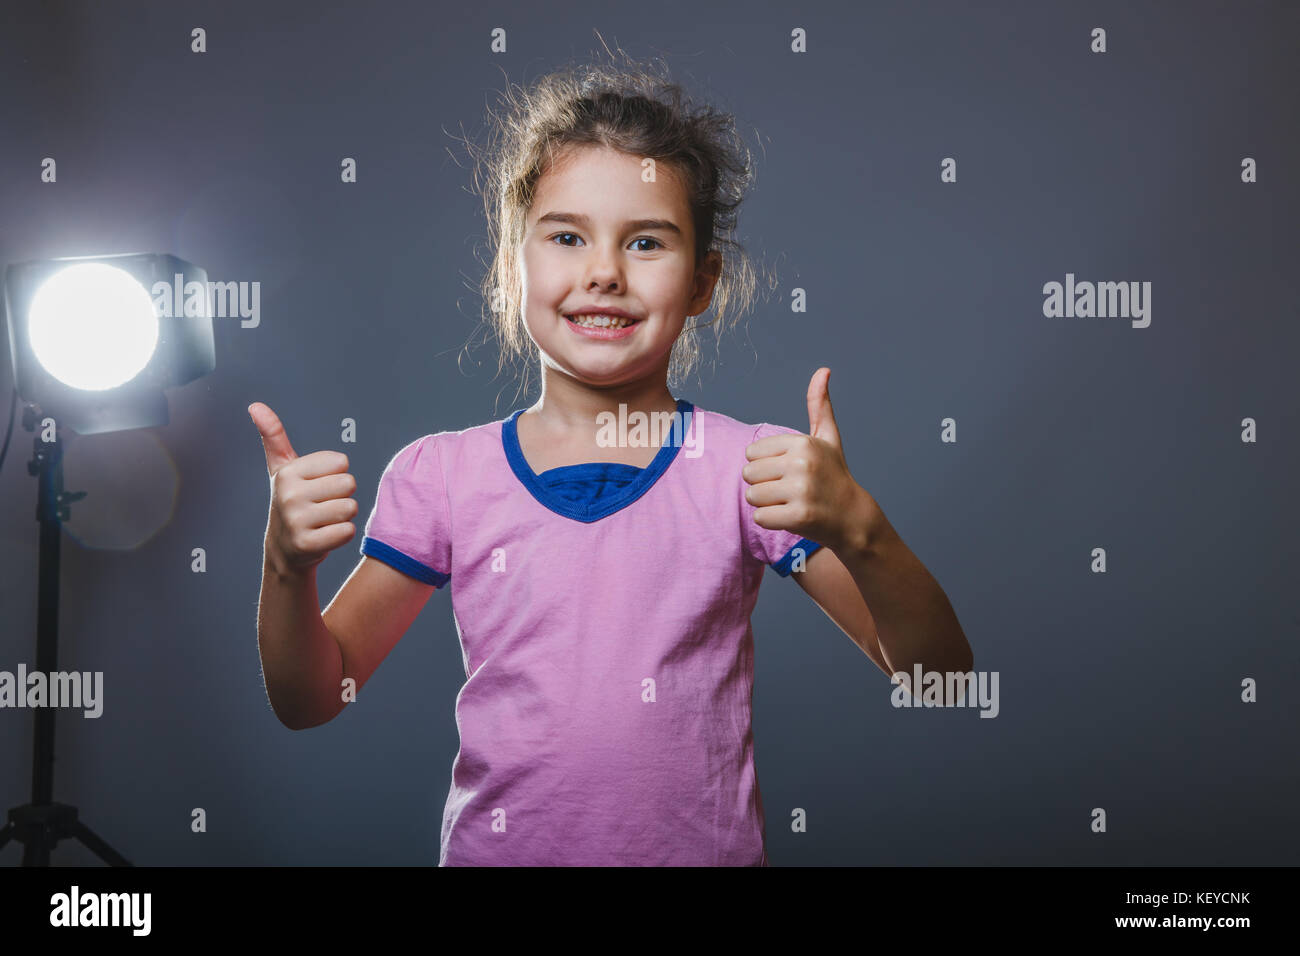 baby girl showing thumbs up sign yes Stock Photo